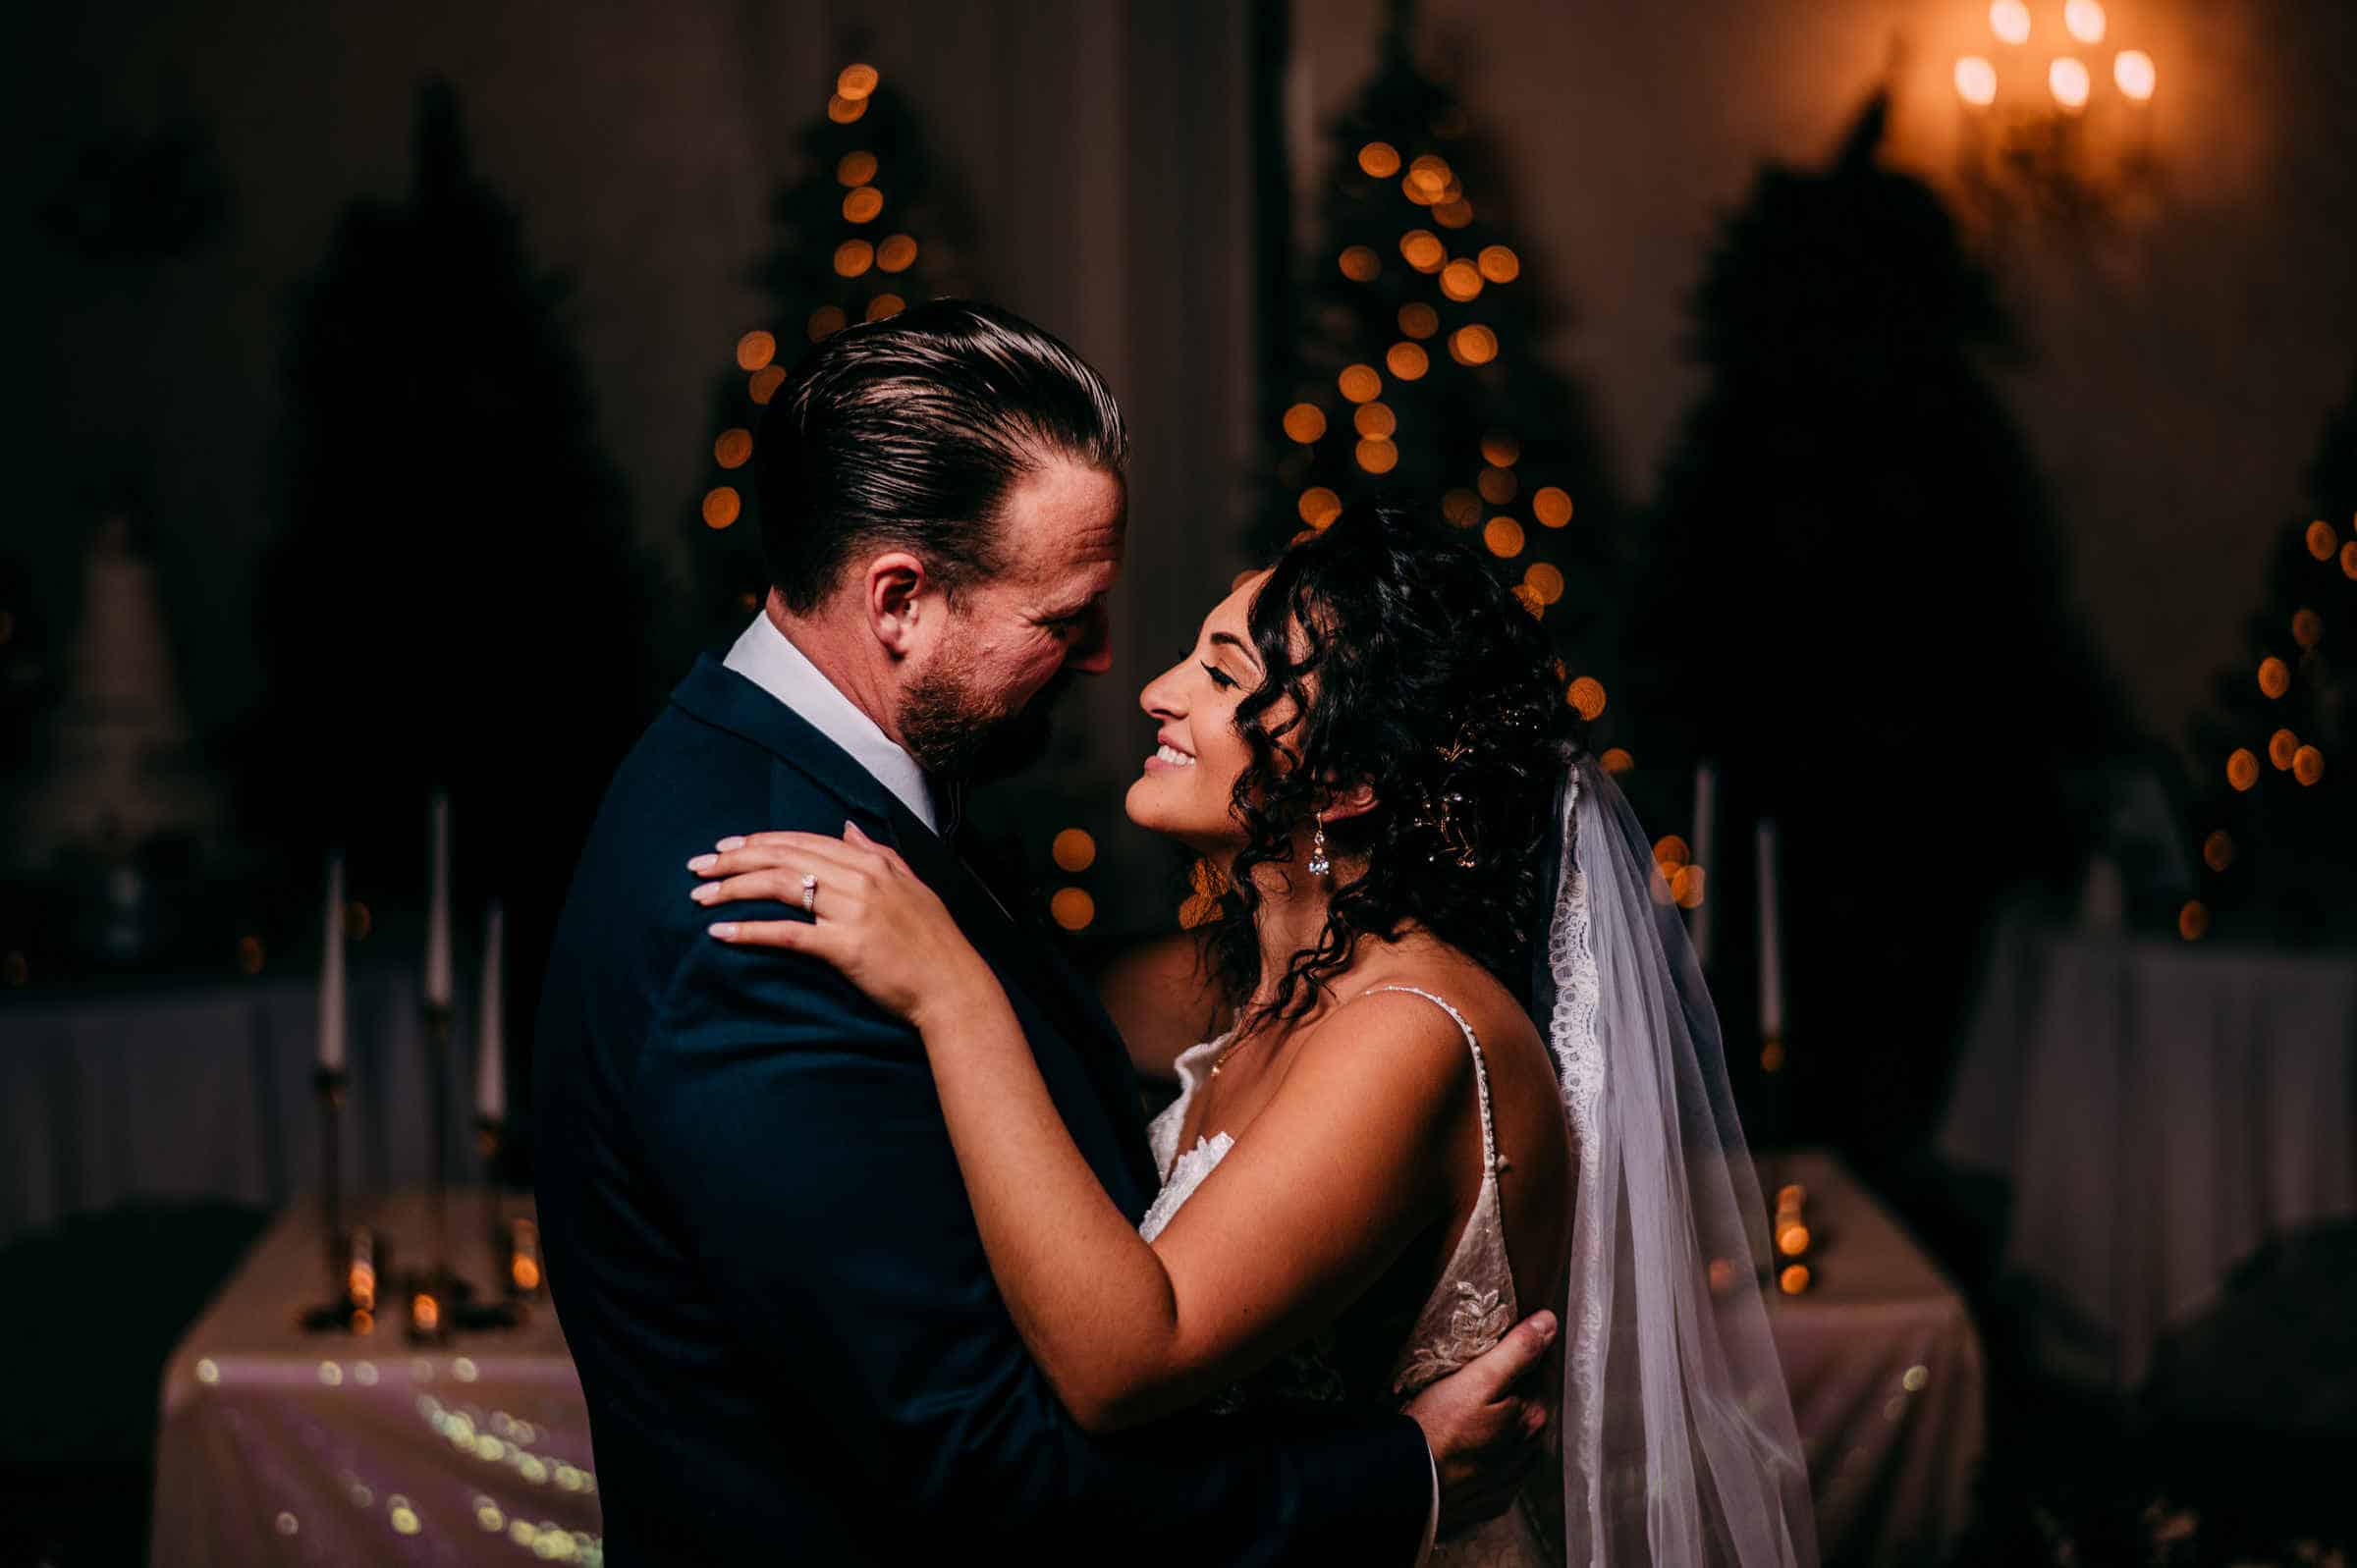 The bride and groom embrace in front of Christmas trees and their sweetheart table during their Cascade Hamden wedding.